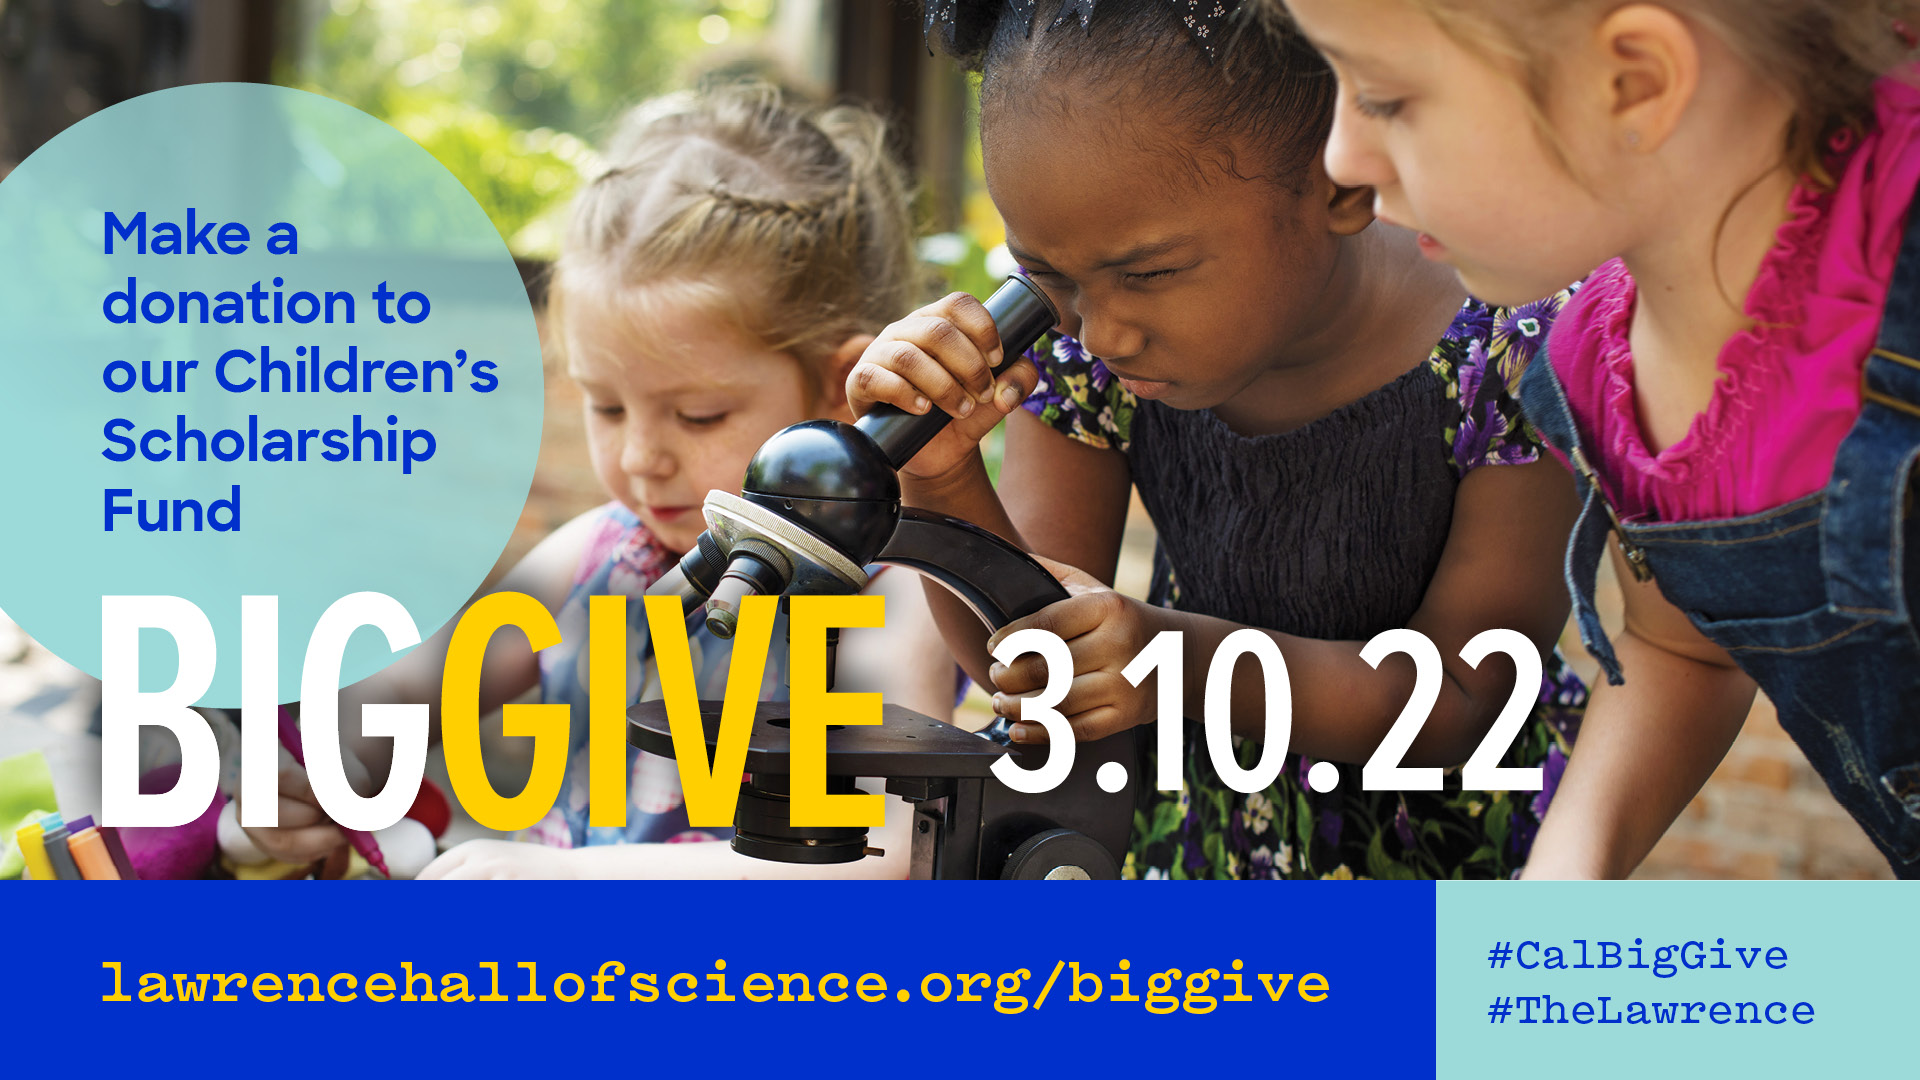 BIG GIVE 3-10-22 Make a donation to our Children's Scholarship Fund